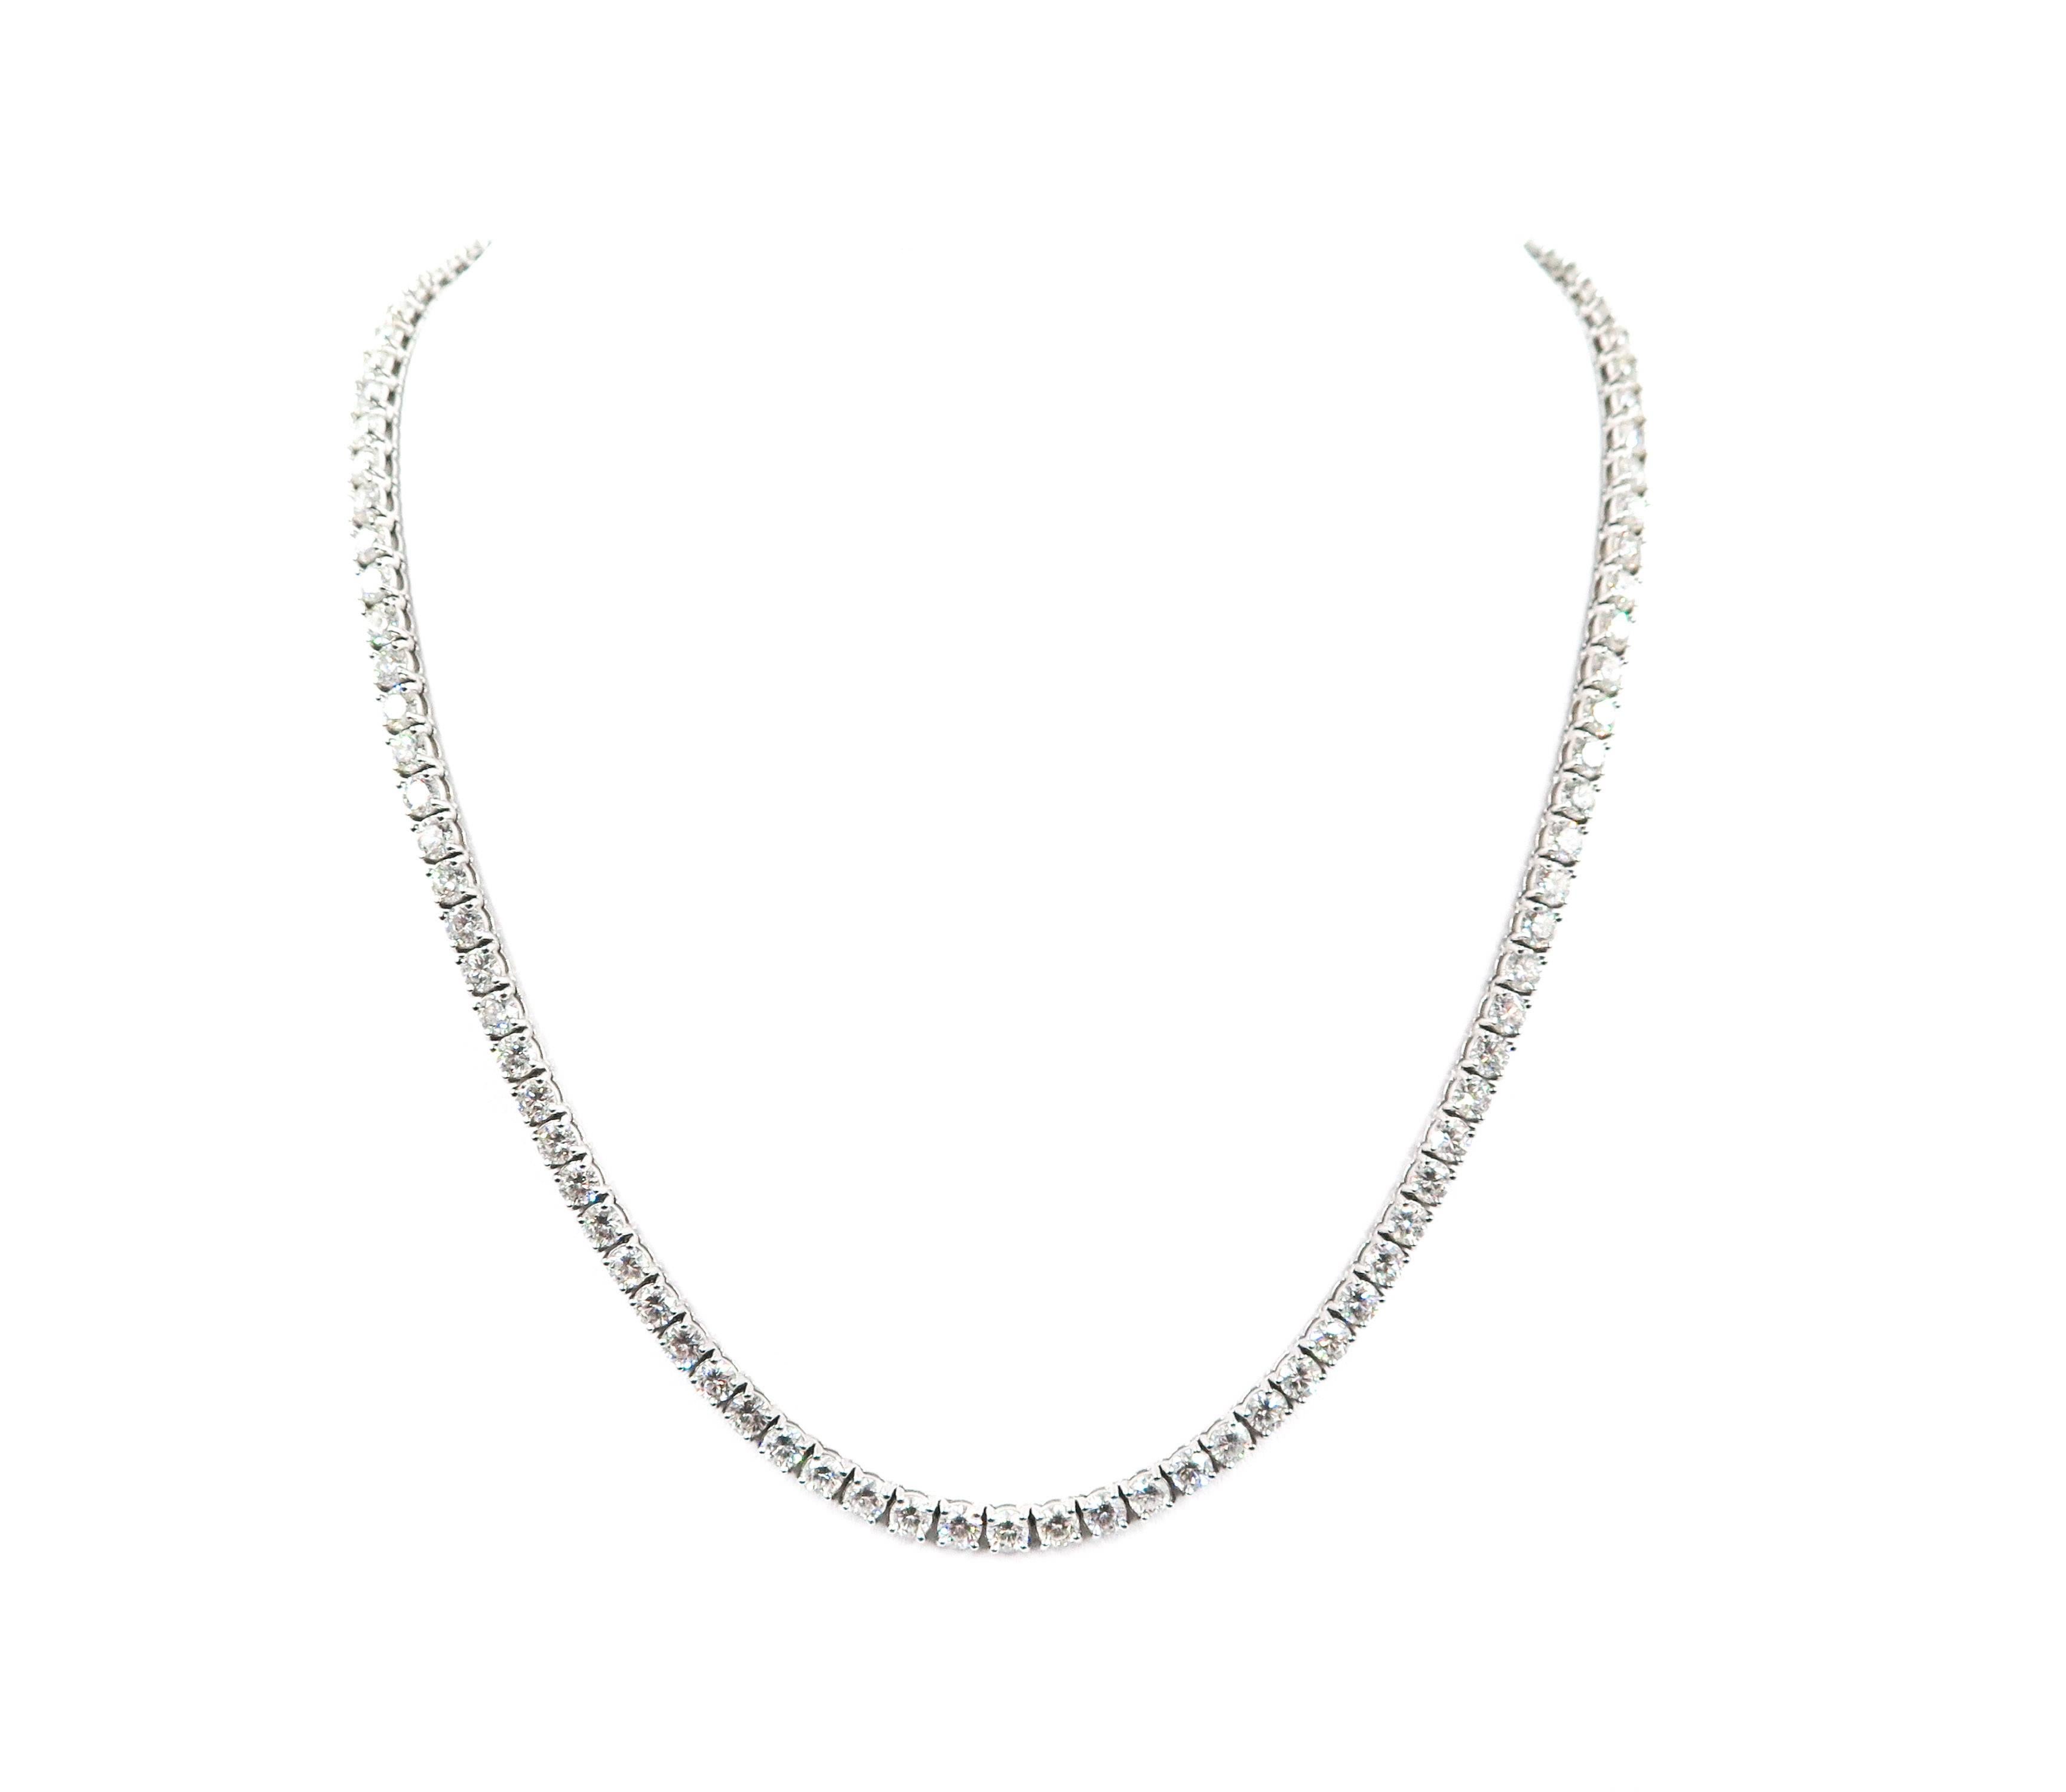 Timeless elegance and everlasting sparkle meet in this stunning tennis necklace in 18K white gold and adorned with 110 perfectly calibrated round brilliant cut diamonds weighing in total 16.25 carats, H color, VS-SI1 in clarity.
This gorgeous